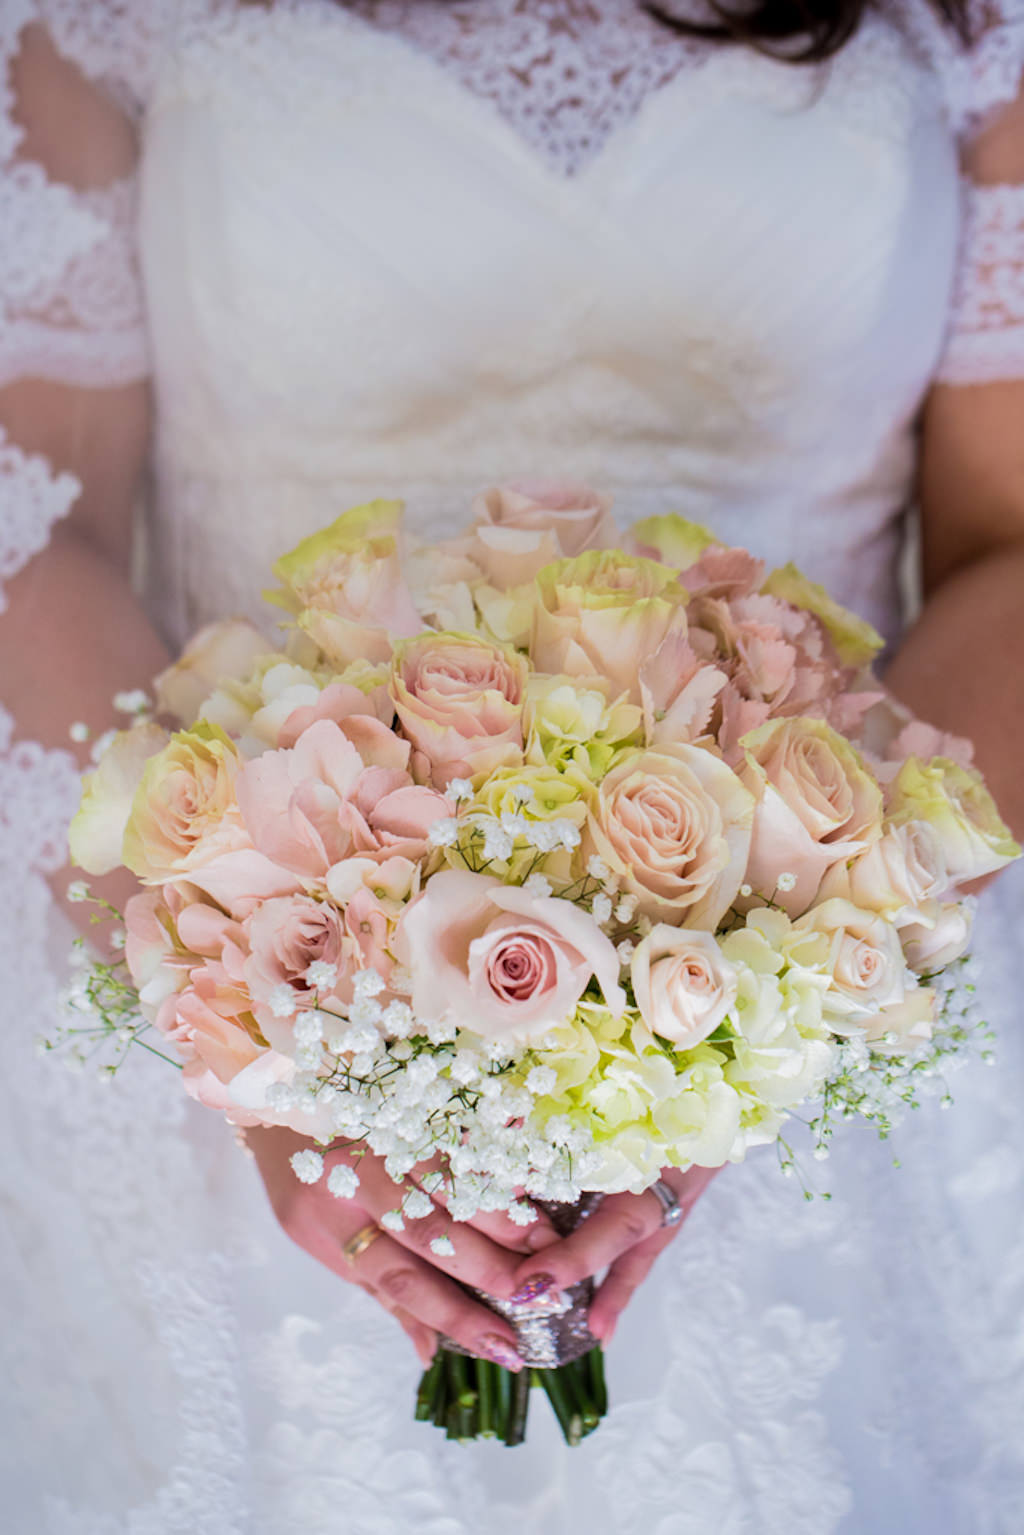 Bridal Portrait with Yellow Floral, White Baby's Breath and Pink Rose Bouquet | Tampa Bay Wedding Florist Gabro Event Services